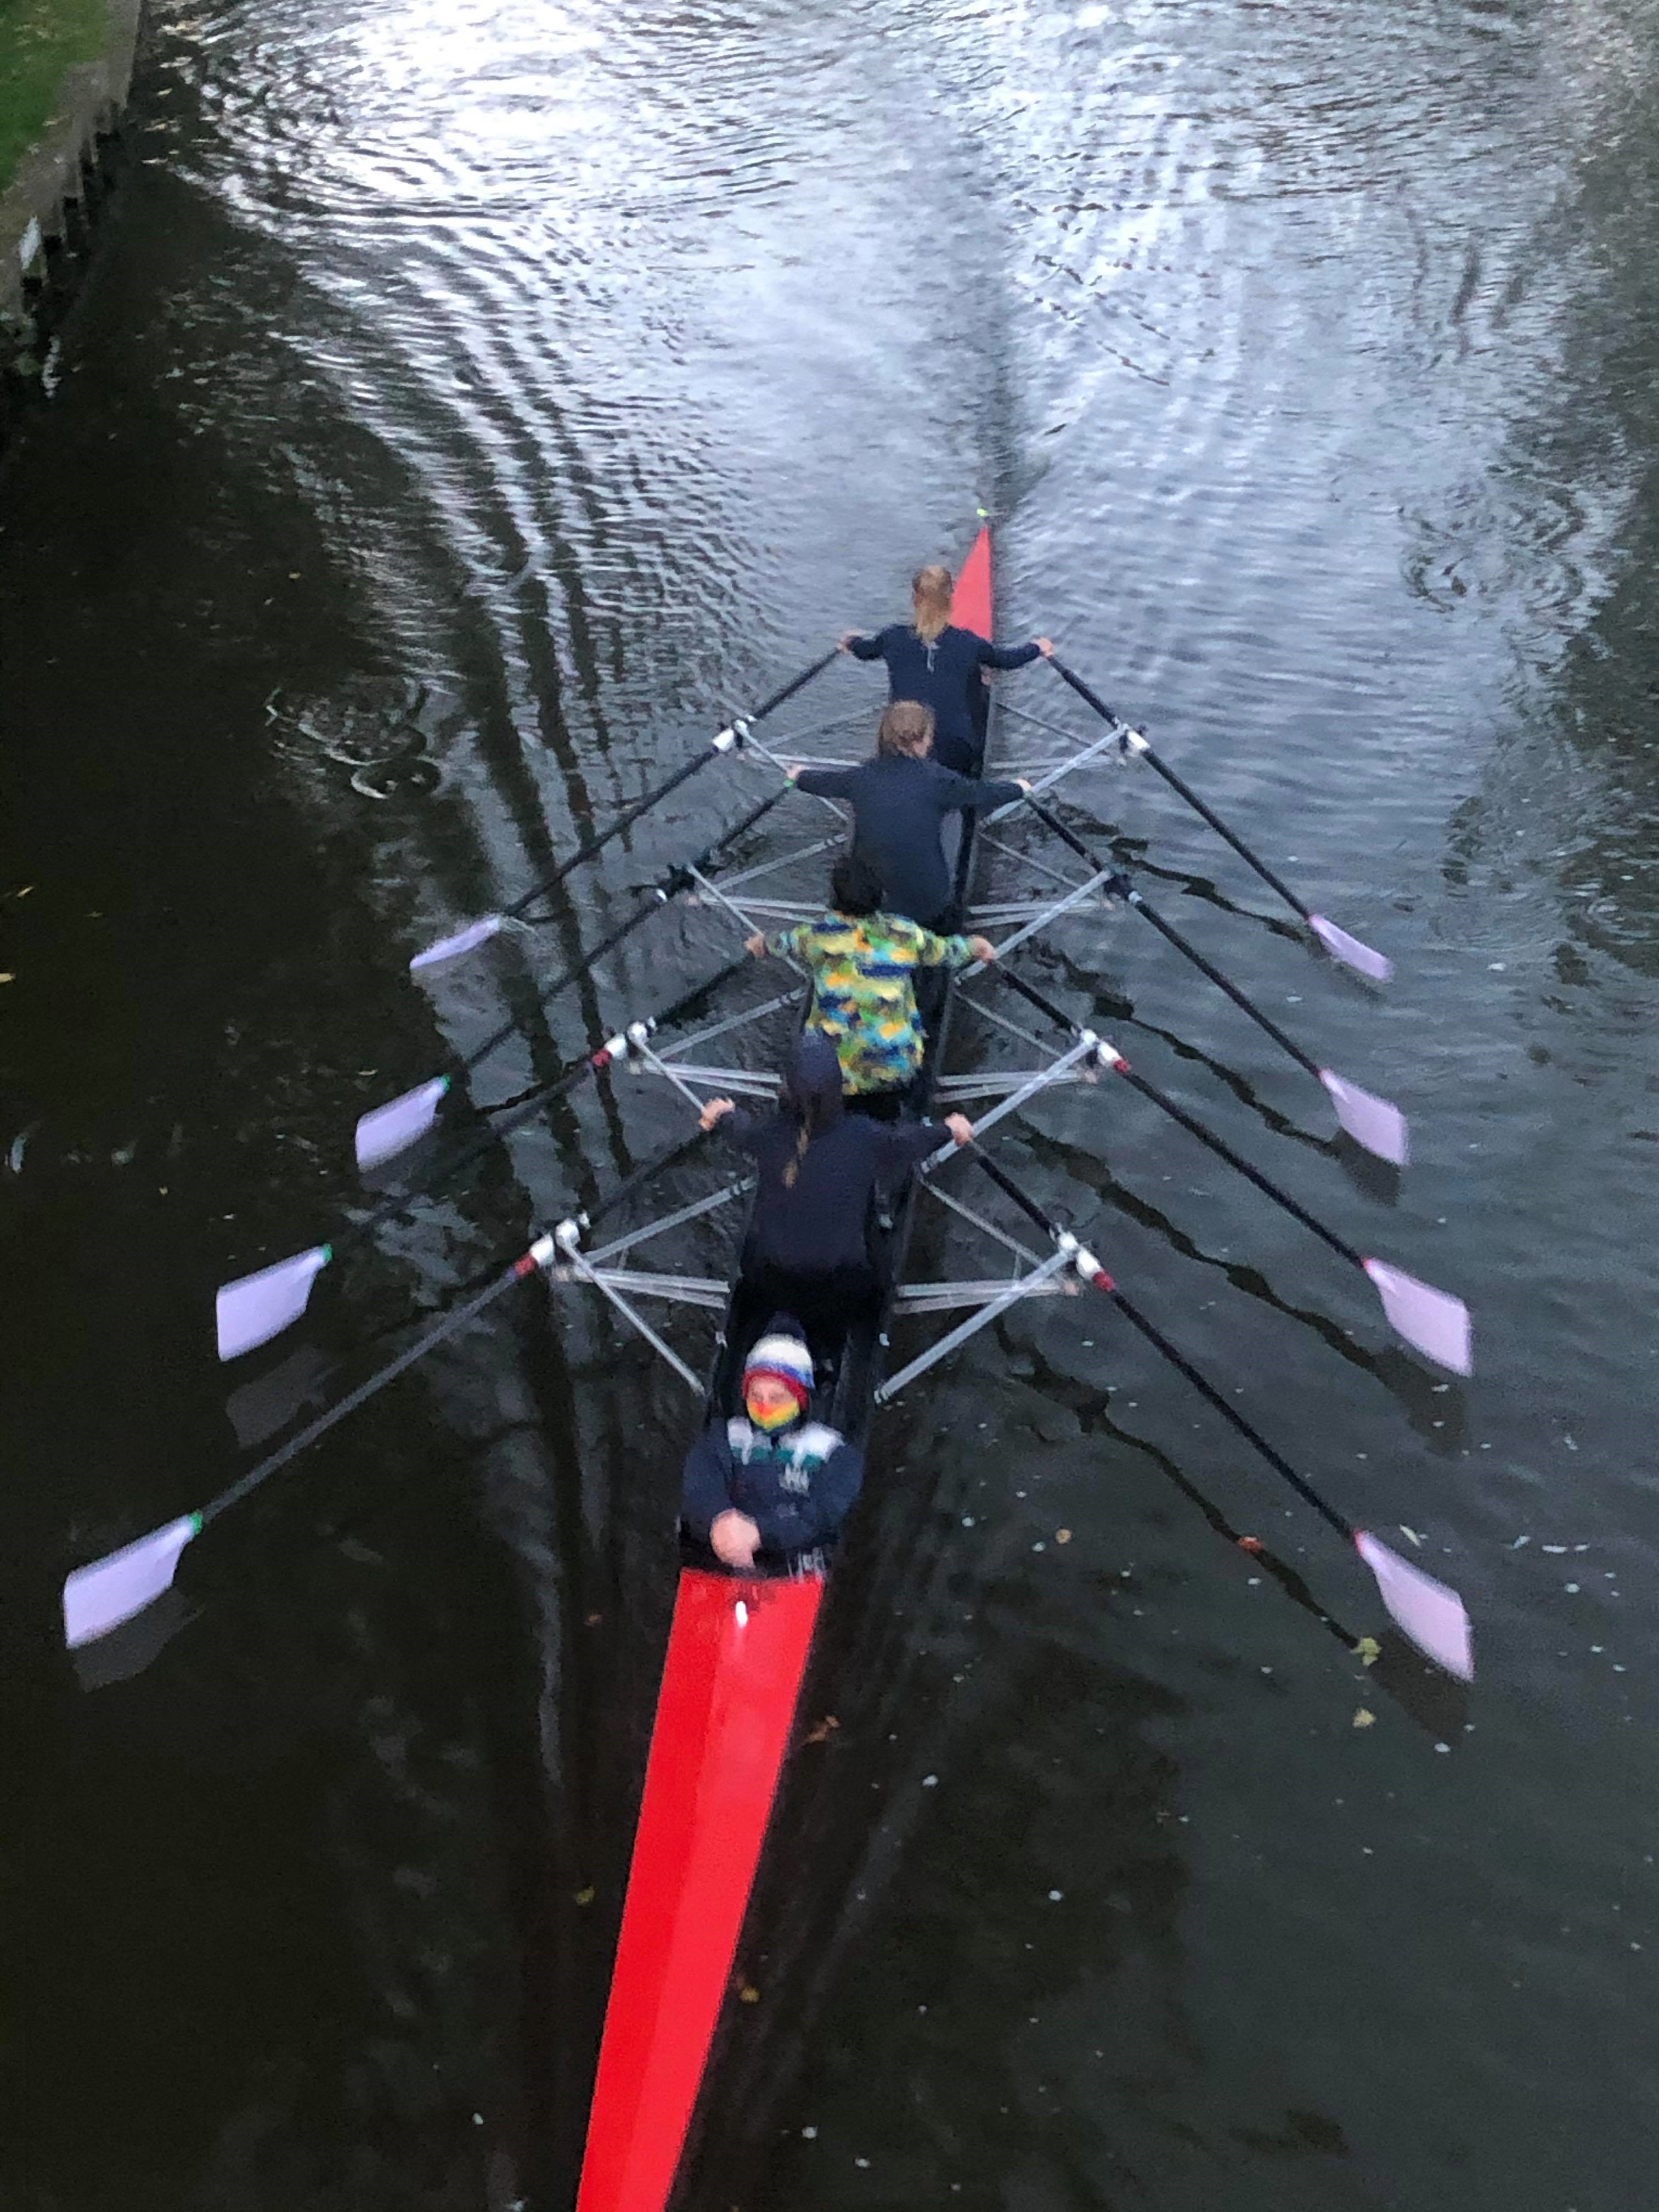 SFR rigged as a coxed quadruple scull, finely displaying the new lavender blades